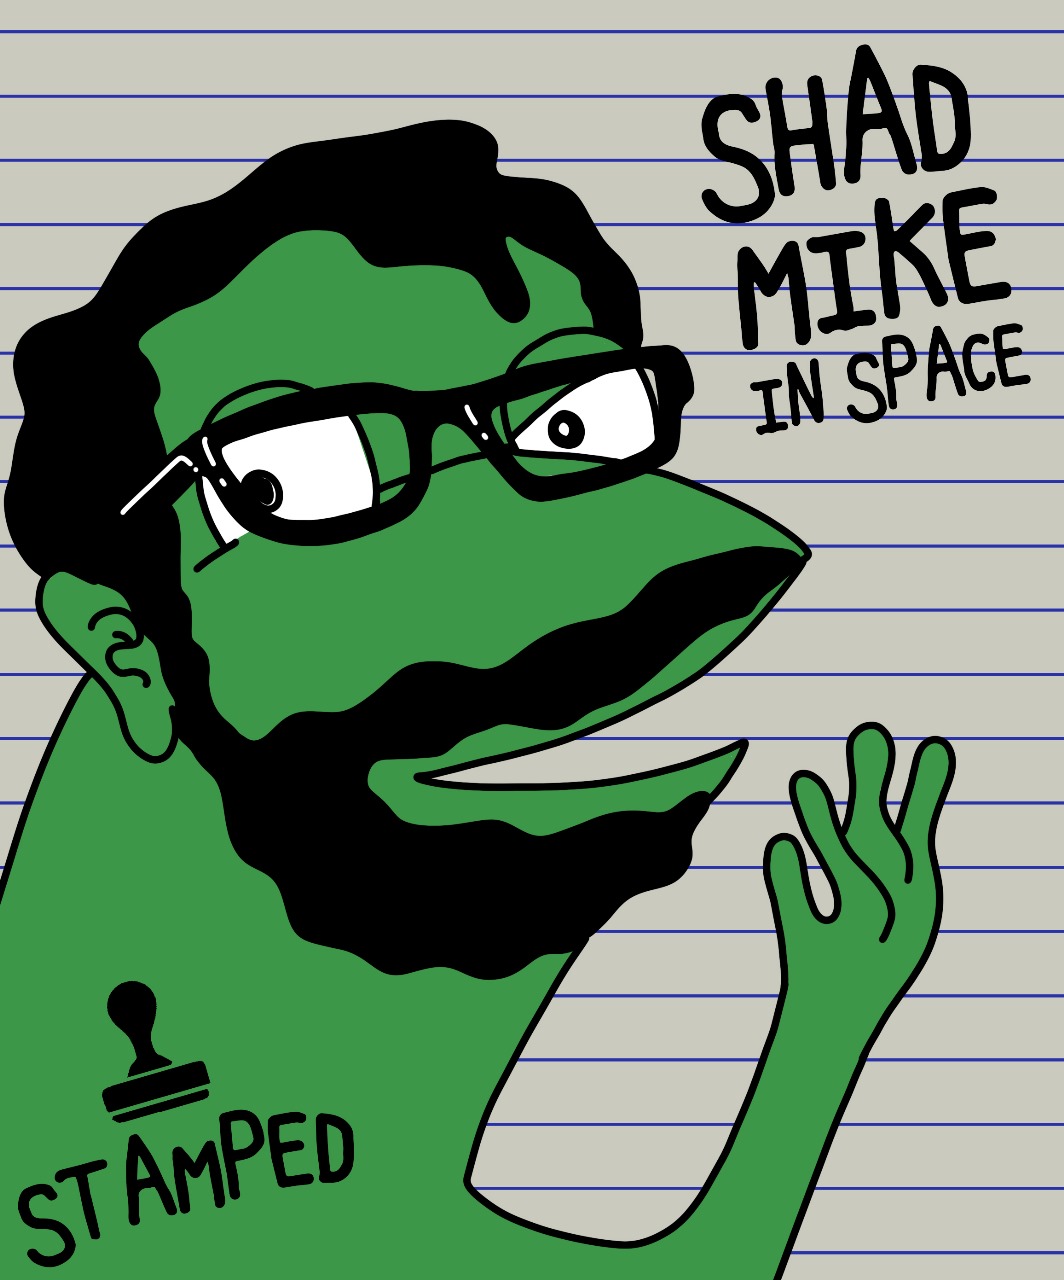 keepgrowing on X: Dedicated to the real shad @mikeinspace @SHADTOKEN Pepe  in 2016 used the shadilay song and the shadilay song released in 1986. #shad  #chad #shadilay #1986 #fatherofallpepe #shad #pepe   /